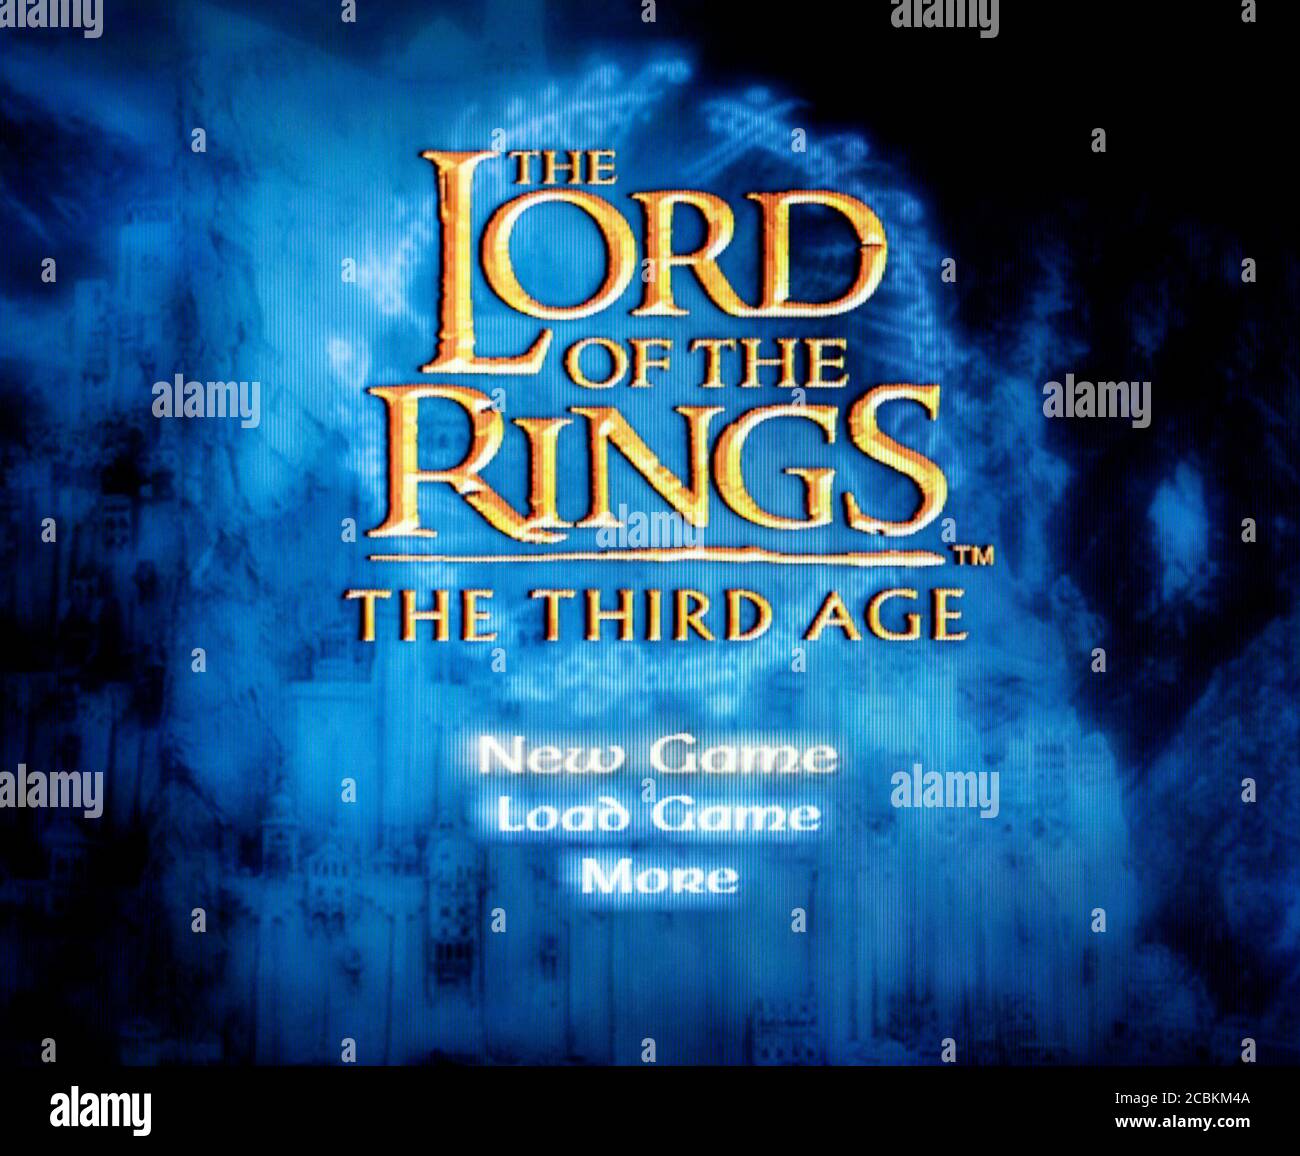 The Lord of the Rings The Third Age - Nintendo Gamecube Videogame - Editorial use only Stock Photo